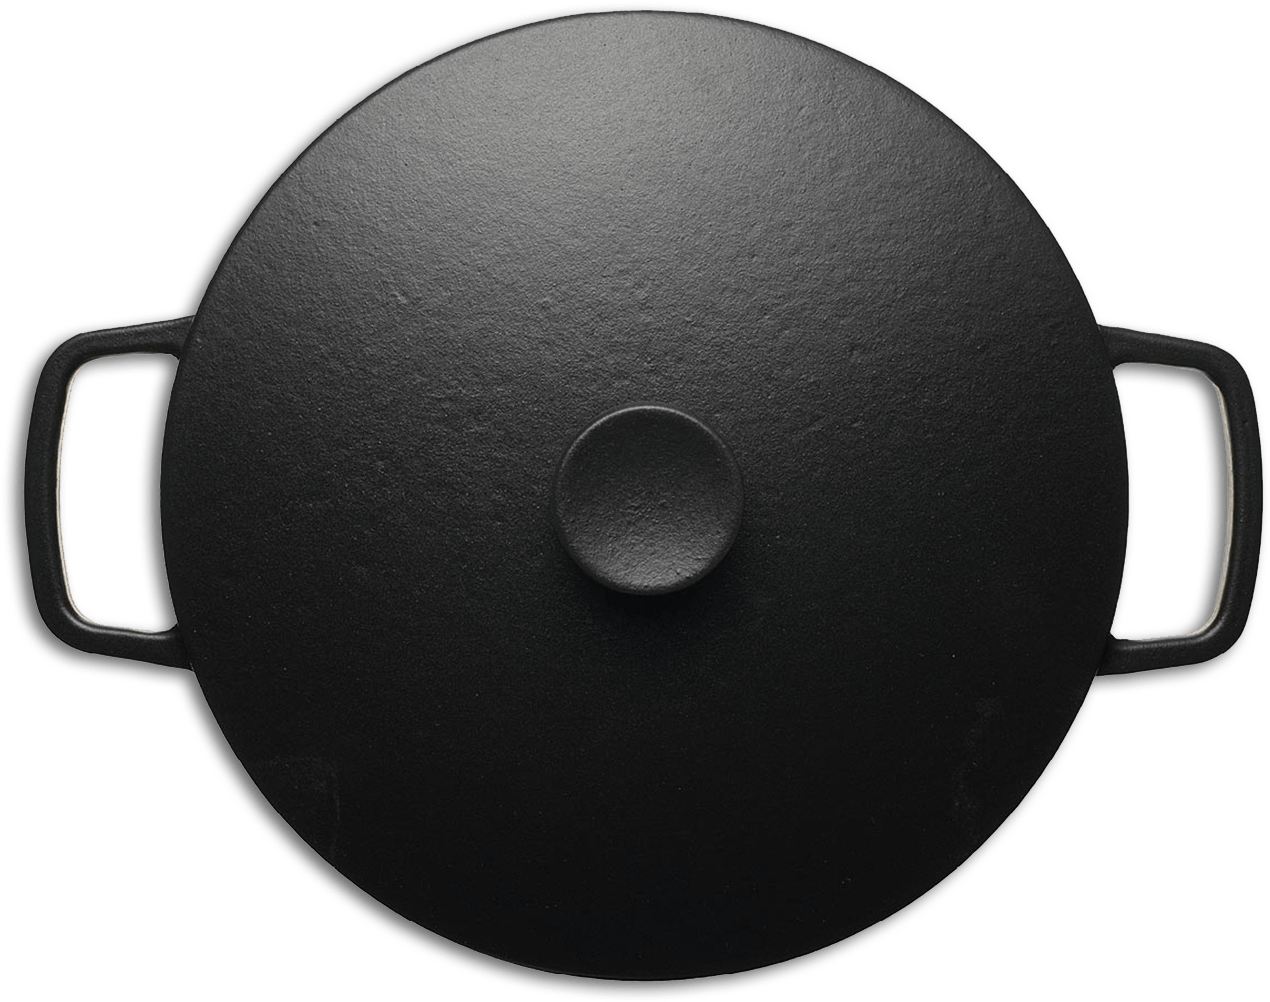 Black Cast Iron Skillet Top View PNG